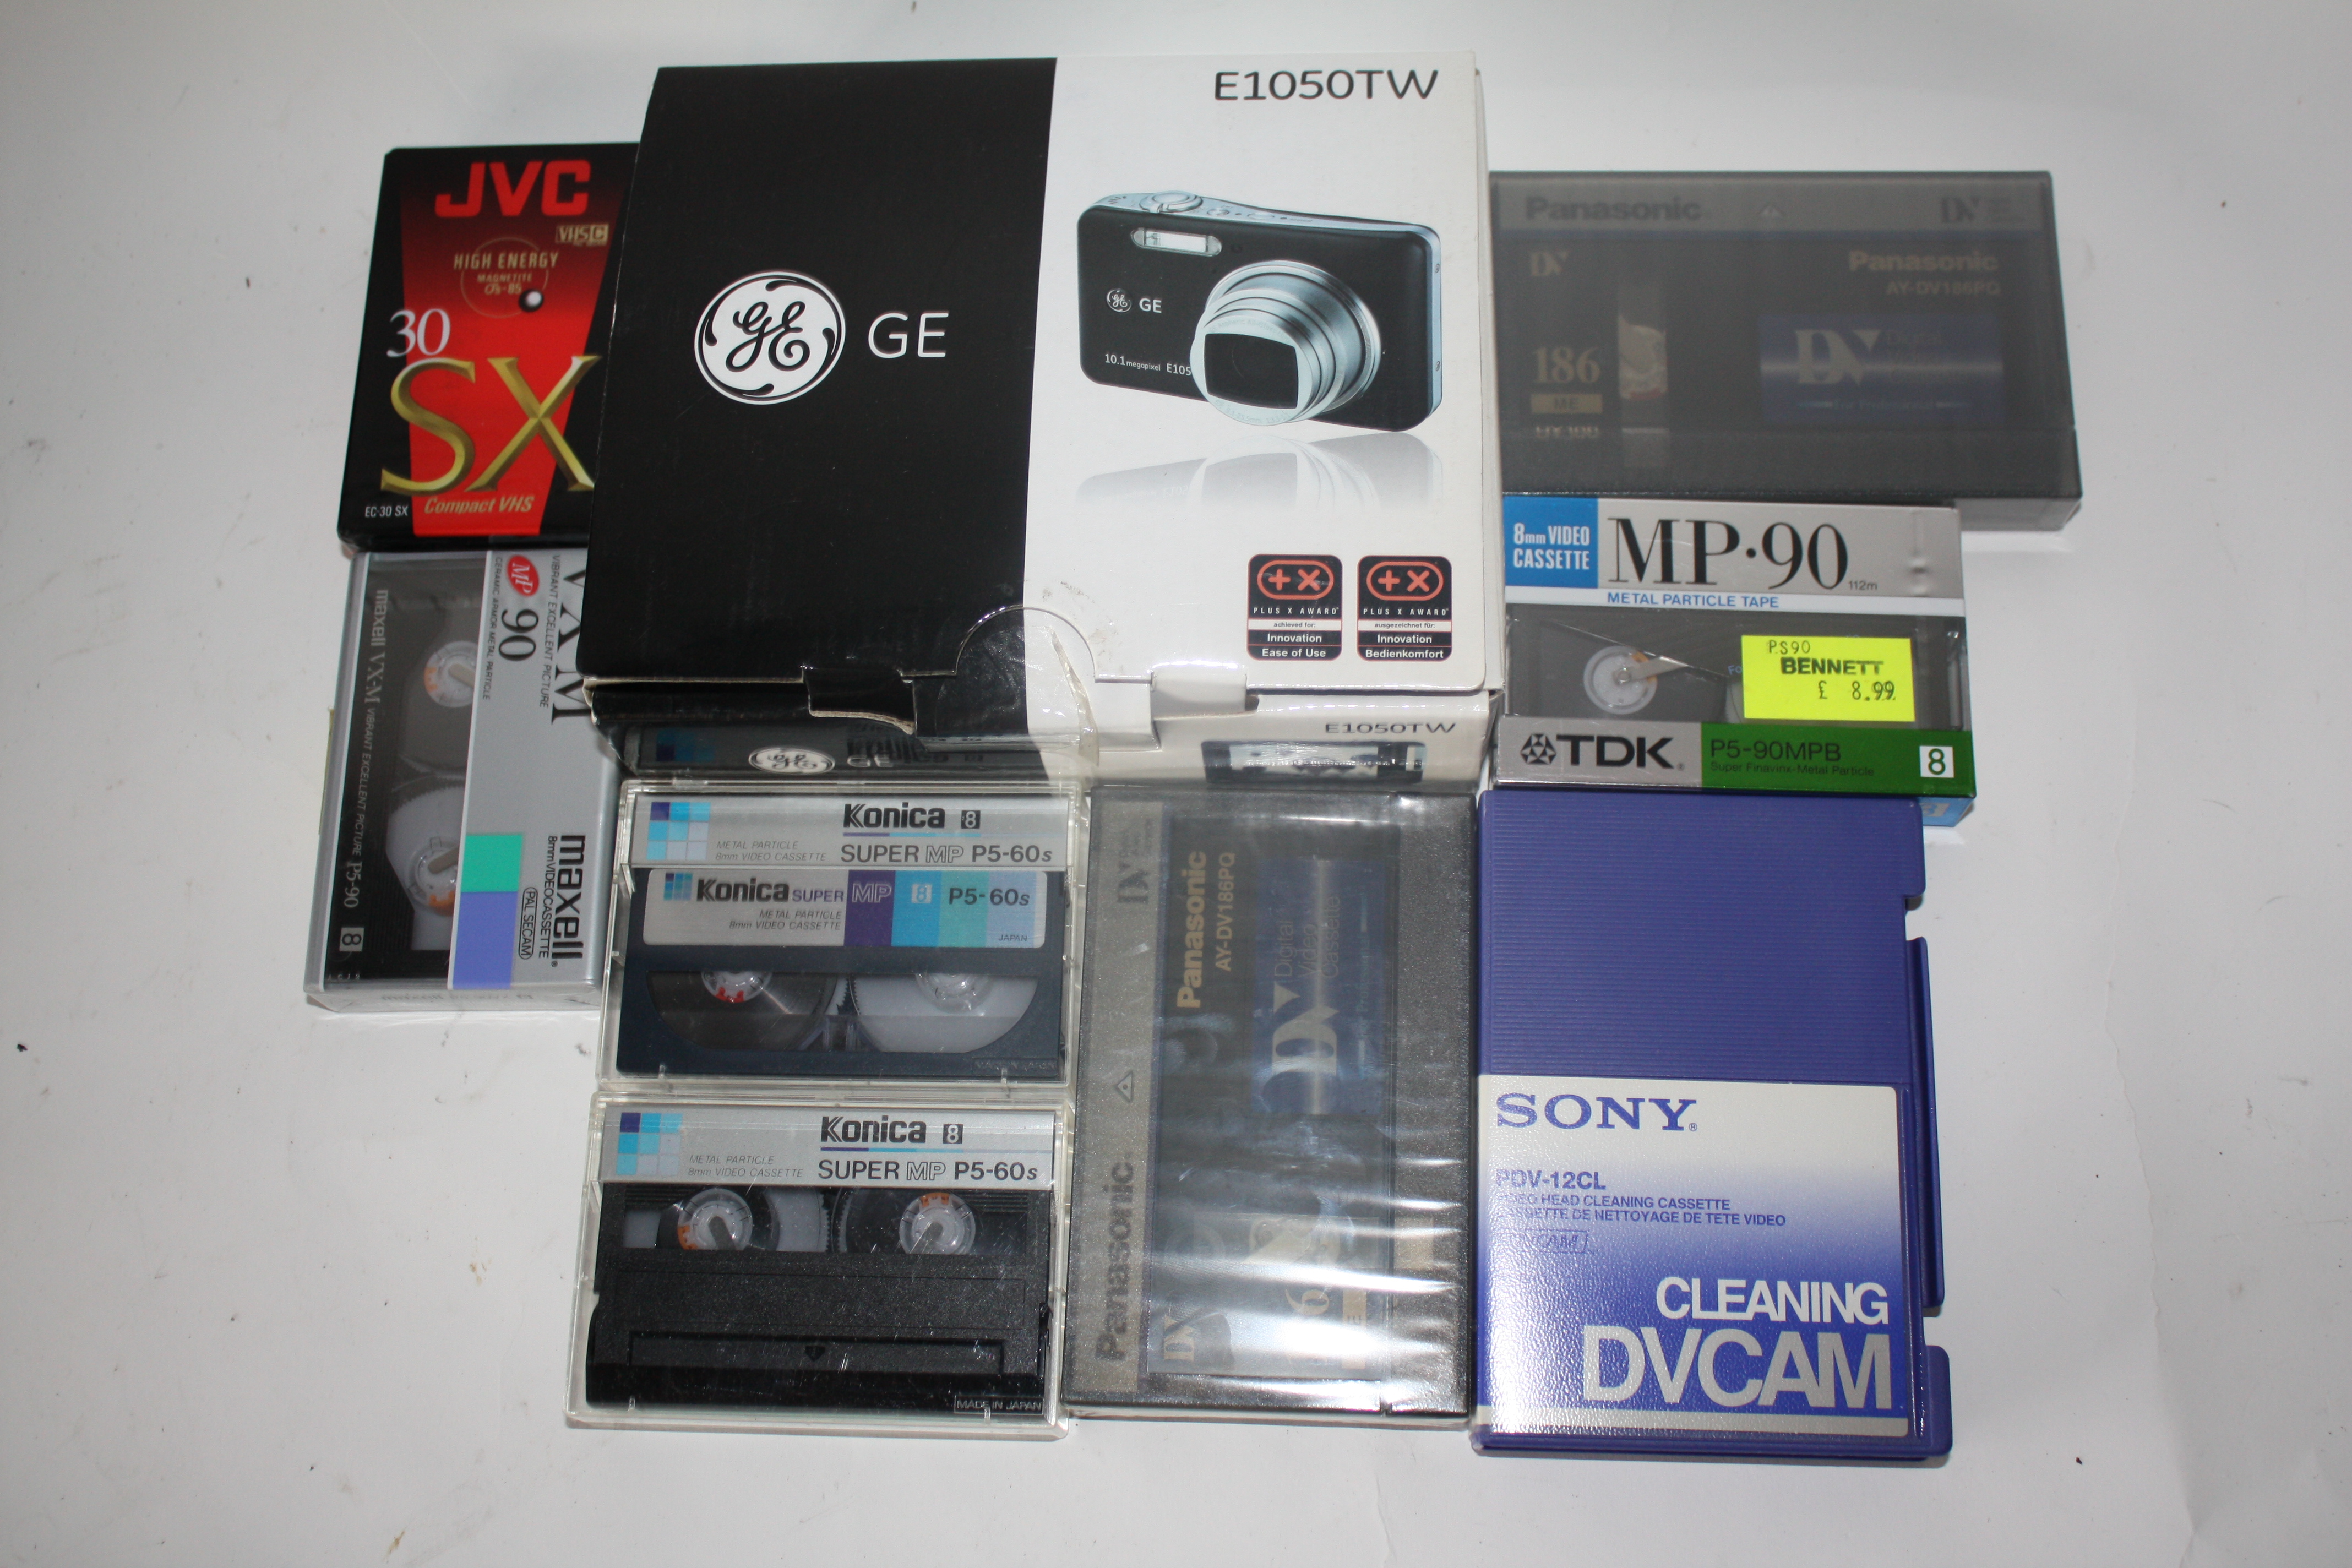 Multiple digital video cassettes, together with a GE E1050 TW camera